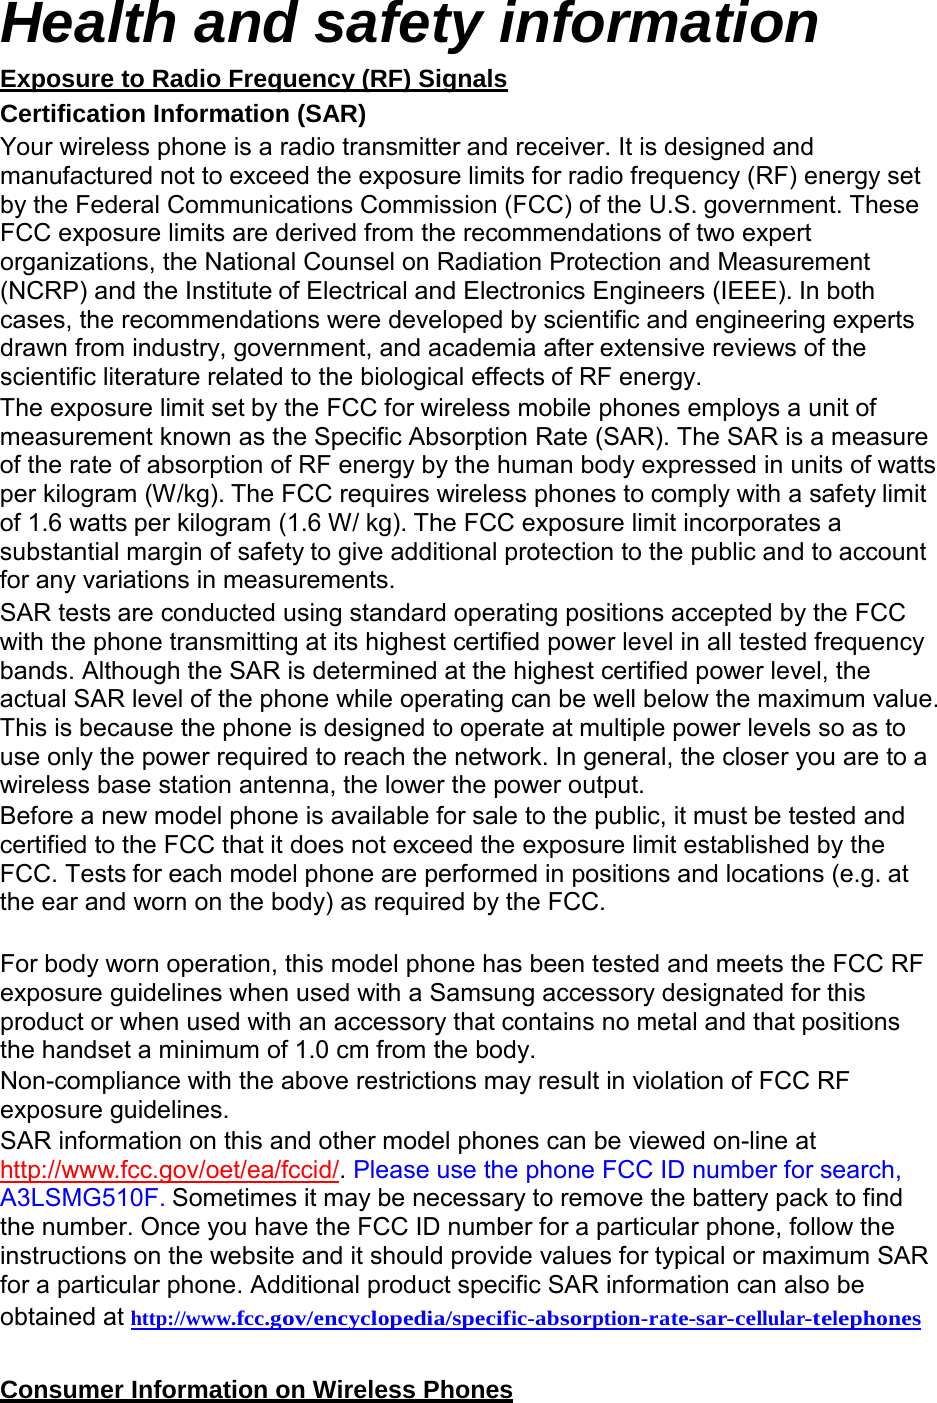  Health and safety information Exposure to Radio Frequency (RF) Signals Certification Information (SAR) Your wireless phone is a radio transmitter and receiver. It is designed and manufactured not to exceed the exposure limits for radio frequency (RF) energy set by the Federal Communications Commission (FCC) of the U.S. government. These FCC exposure limits are derived from the recommendations of two expert organizations, the National Counsel on Radiation Protection and Measurement (NCRP) and the Institute of Electrical and Electronics Engineers (IEEE). In both cases, the recommendations were developed by scientific and engineering experts drawn from industry, government, and academia after extensive reviews of the scientific literature related to the biological effects of RF energy. The exposure limit set by the FCC for wireless mobile phones employs a unit of measurement known as the Specific Absorption Rate (SAR). The SAR is a measure of the rate of absorption of RF energy by the human body expressed in units of watts per kilogram (W/kg). The FCC requires wireless phones to comply with a safety limit of 1.6 watts per kilogram (1.6 W/ kg). The FCC exposure limit incorporates a substantial margin of safety to give additional protection to the public and to account for any variations in measurements. SAR tests are conducted using standard operating positions accepted by the FCC with the phone transmitting at its highest certified power level in all tested frequency bands. Although the SAR is determined at the highest certified power level, the actual SAR level of the phone while operating can be well below the maximum value. This is because the phone is designed to operate at multiple power levels so as to use only the power required to reach the network. In general, the closer you are to a wireless base station antenna, the lower the power output. Before a new model phone is available for sale to the public, it must be tested and certified to the FCC that it does not exceed the exposure limit established by the FCC. Tests for each model phone are performed in positions and locations (e.g. at the ear and worn on the body) as required by the FCC.   For body worn operation, this model phone has been tested and meets the FCC RF exposure guidelines when used with a Samsung accessory designated for this product or when used with an accessory that contains no metal and that positions the handset a minimum of 1.0 cm from the body. Non-compliance with the above restrictions may result in violation of FCC RF exposure guidelines. SAR information on this and other model phones can be viewed on-line at http://www.fcc.gov/oet/ea/fccid/. Please use the phone FCC ID number for search, A3LSMG510F. Sometimes it may be necessary to remove the battery pack to find the number. Once you have the FCC ID number for a particular phone, follow the instructions on the website and it should provide values for typical or maximum SAR for a particular phone. Additional product specific SAR information can also be obtained at  http://www.fcc.gov/encyclopedia/specific-absorption-rate-sar-cellular-telephones   Consumer Information on Wireless Phones 